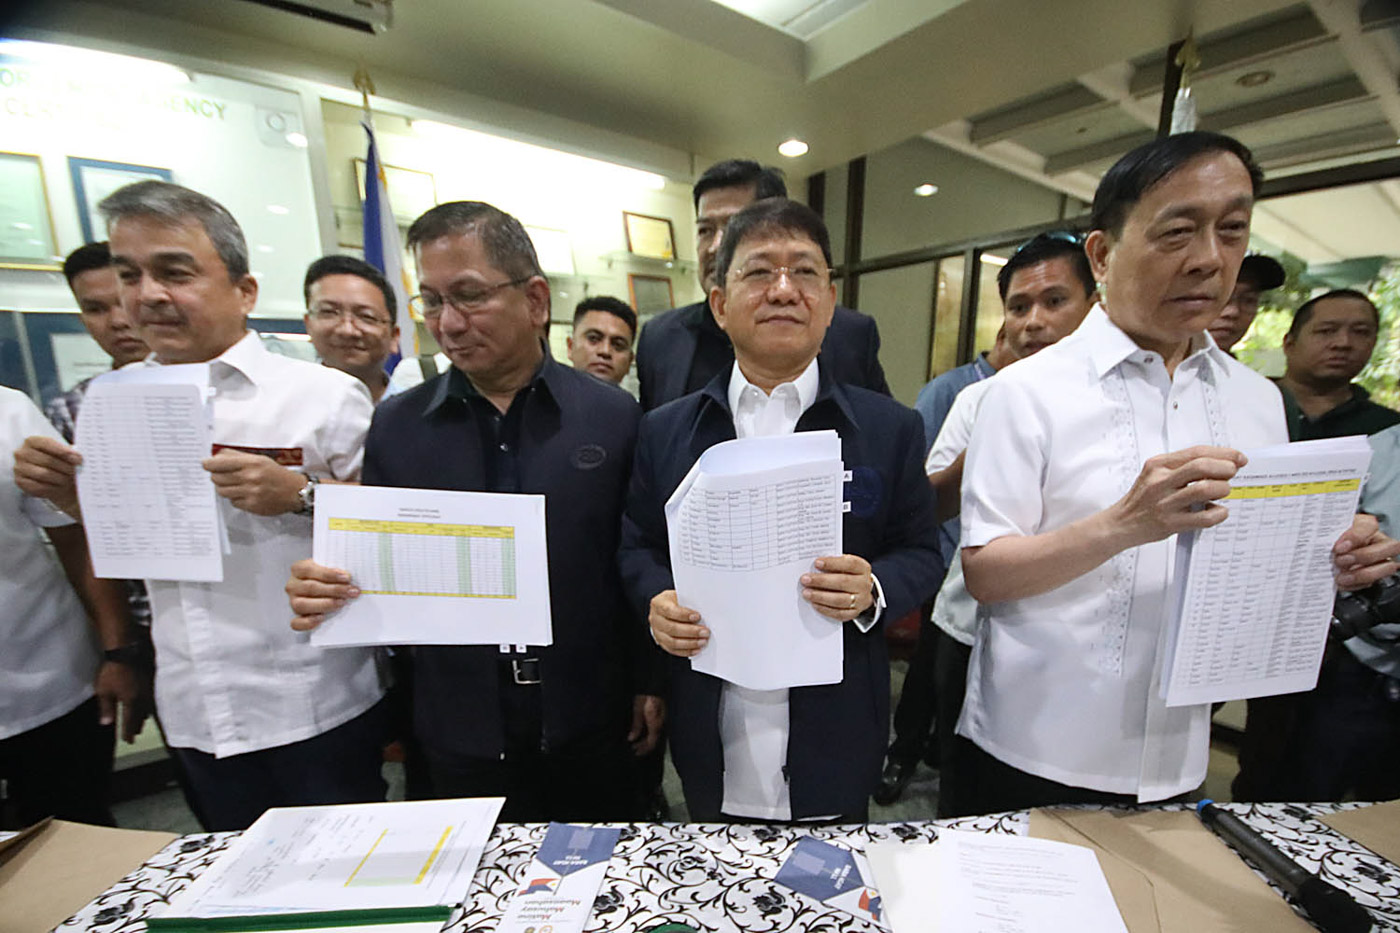 ANOTHER LIST? DILG Secretary Eduardo Año wants a repeat of April 2018, when they released a drug list of barangay officials just before the barangay elections. Photo by Darren Langit/Rappler  